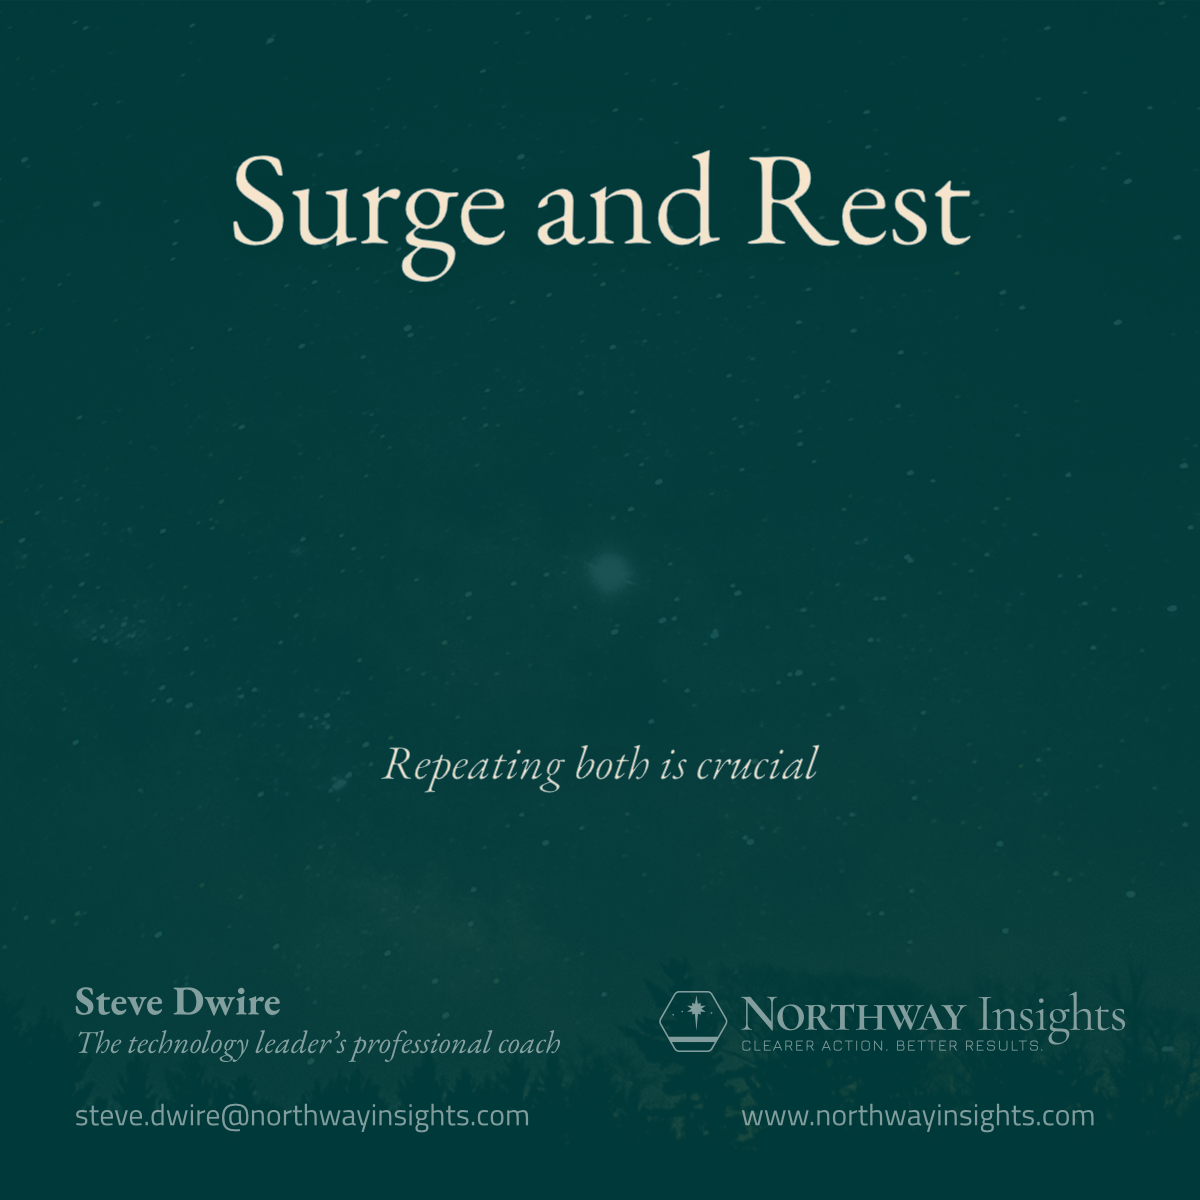 Surge and Rest